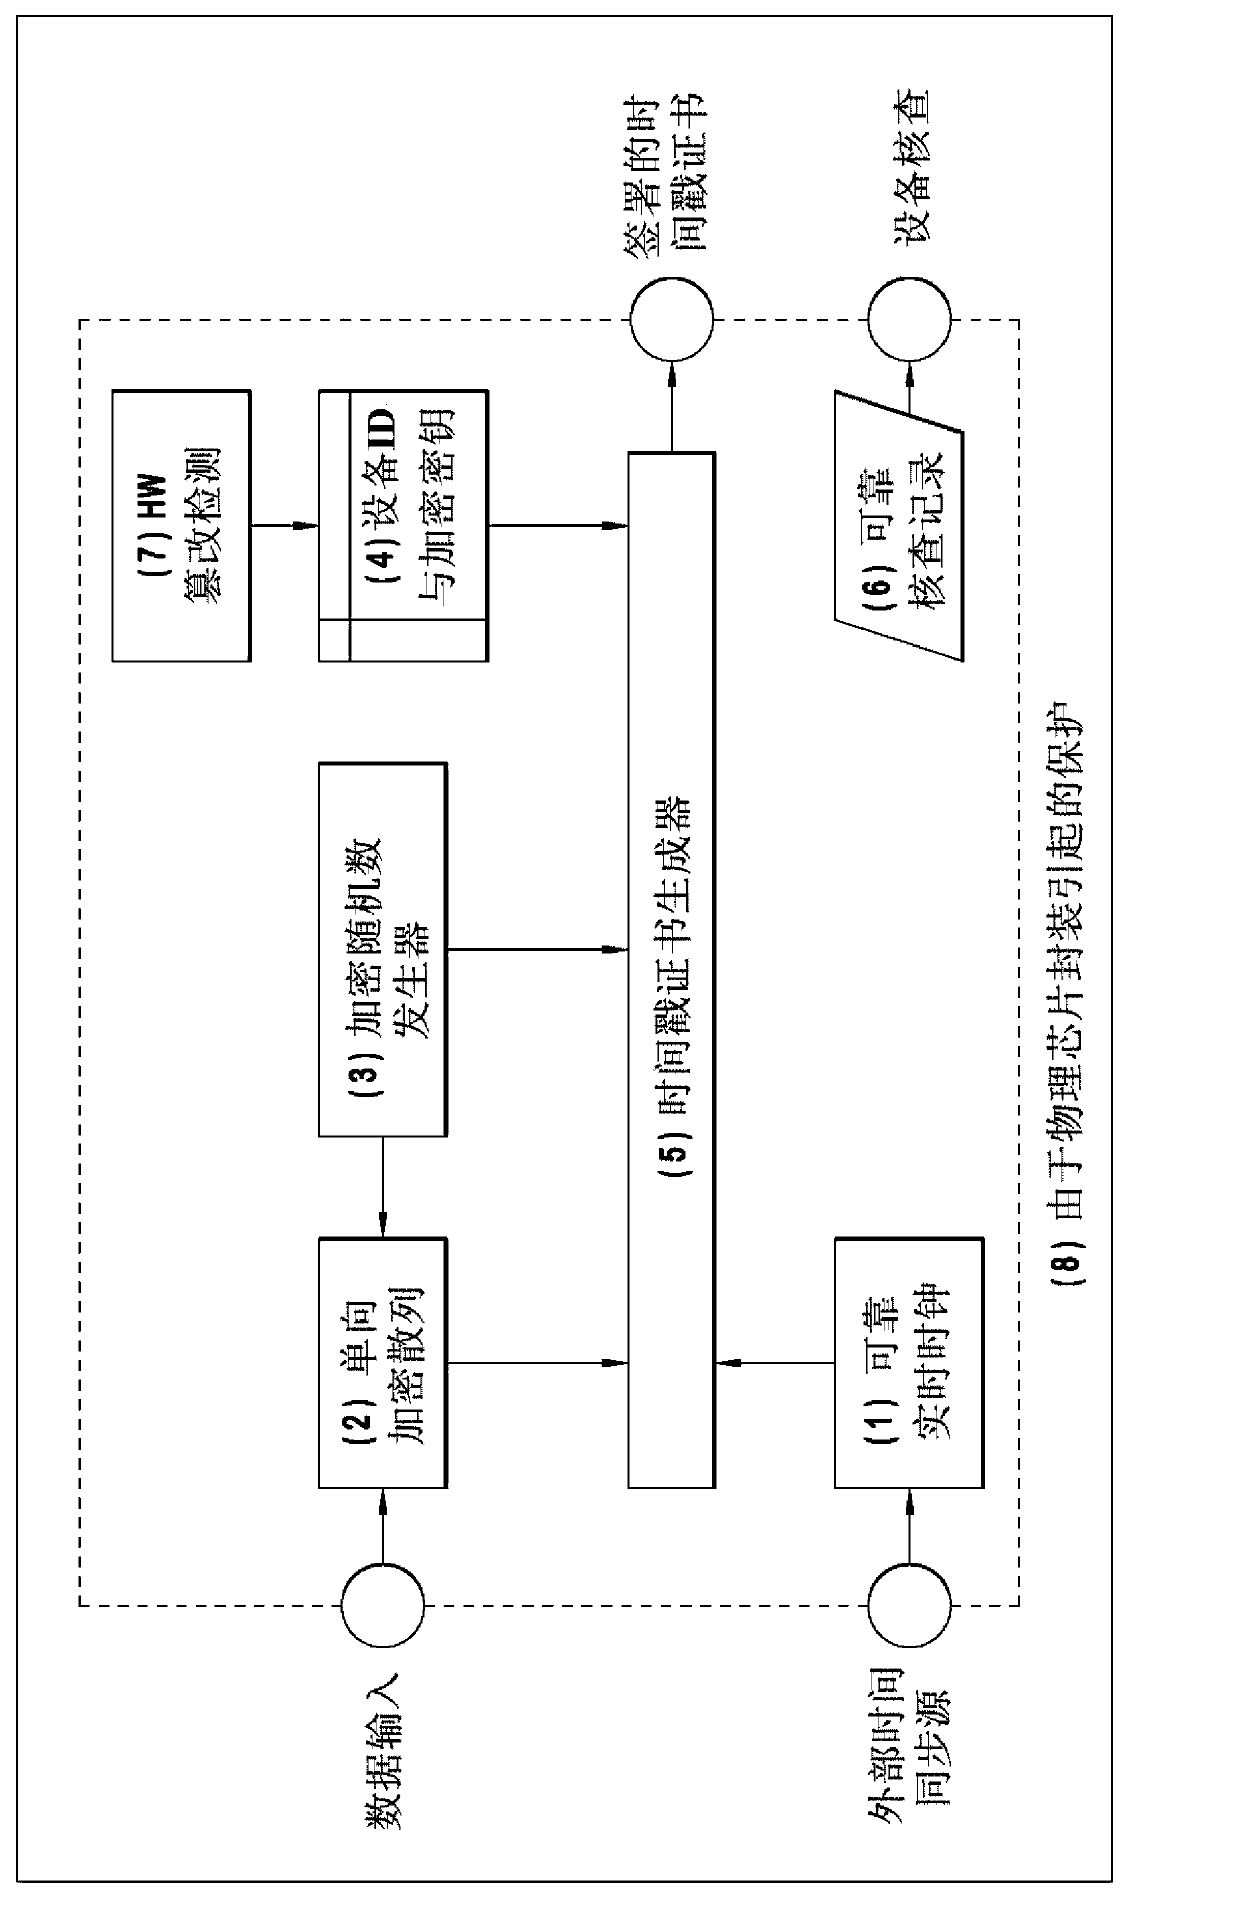 Wireless communication device and extensional subscriber identity module used in wtru